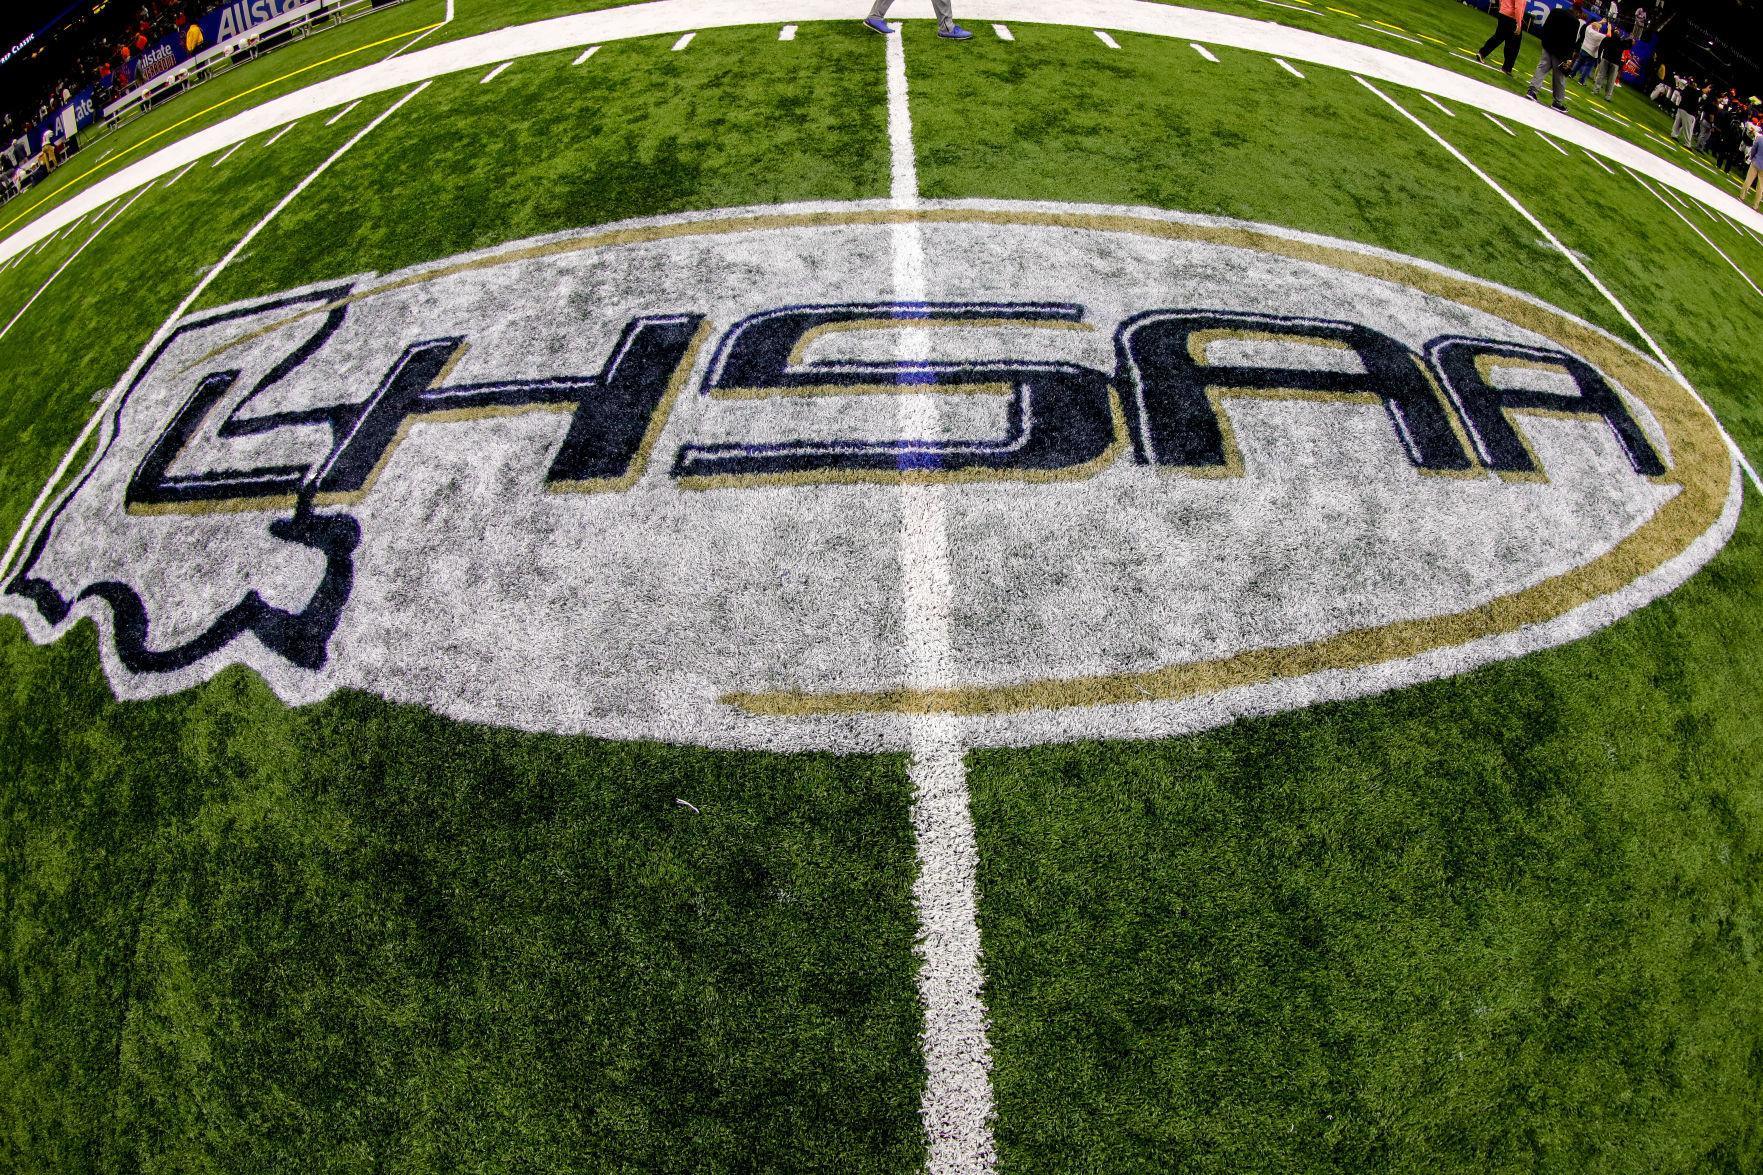 LHSAA list shows all New Orleans, Jefferson Parish schools as select